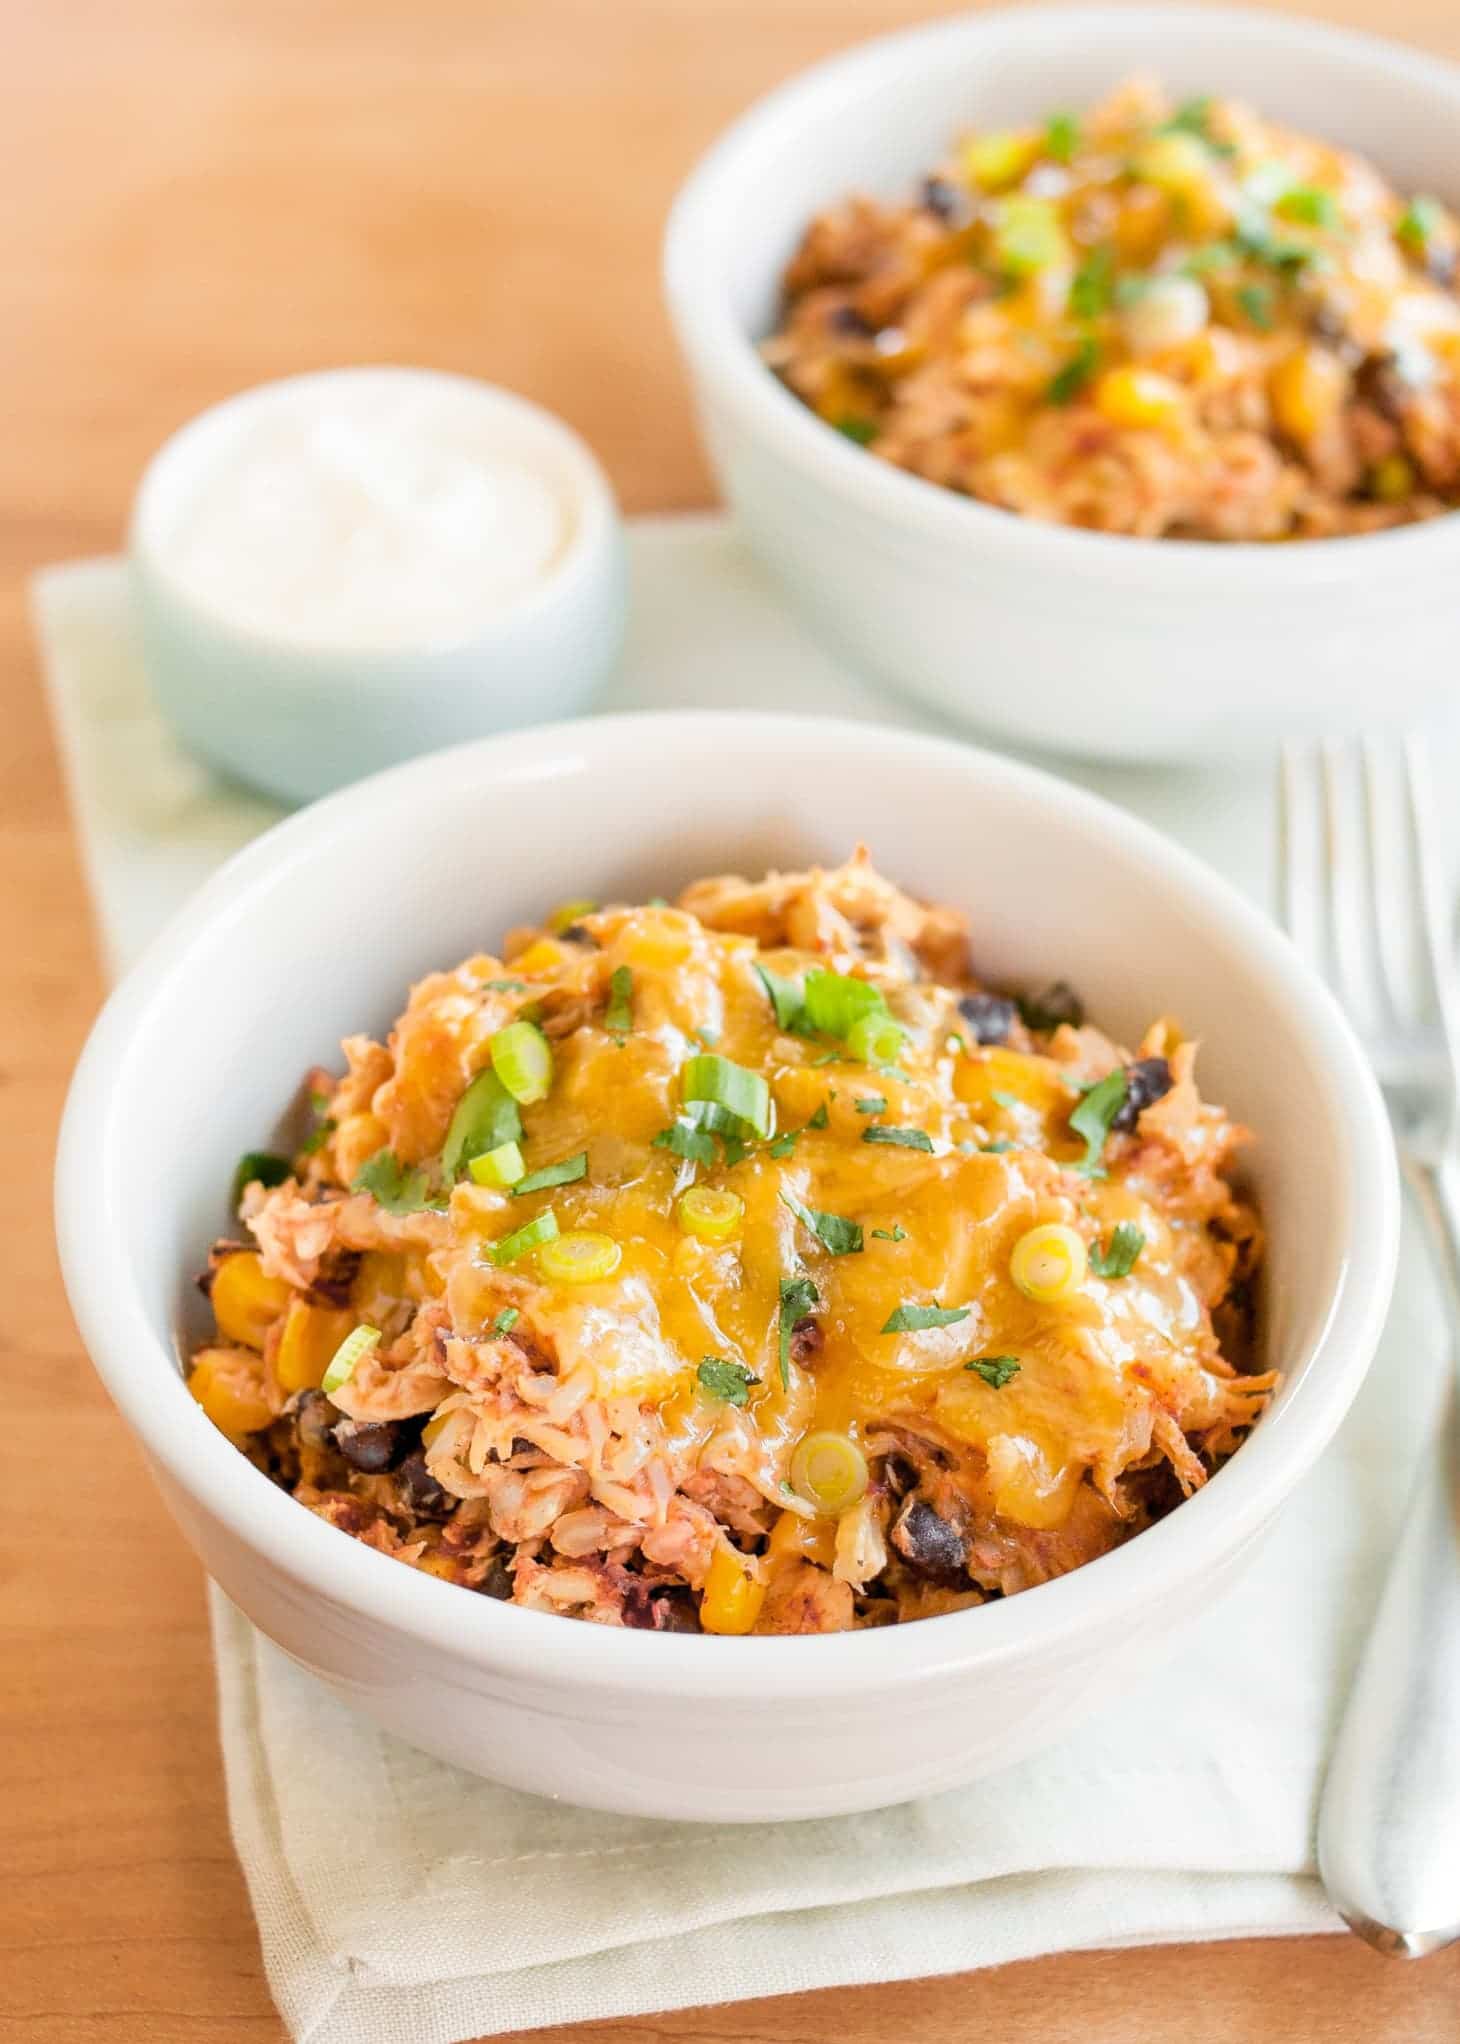 Slow Cooker Chicken Burrito Bowls from The Kitchn